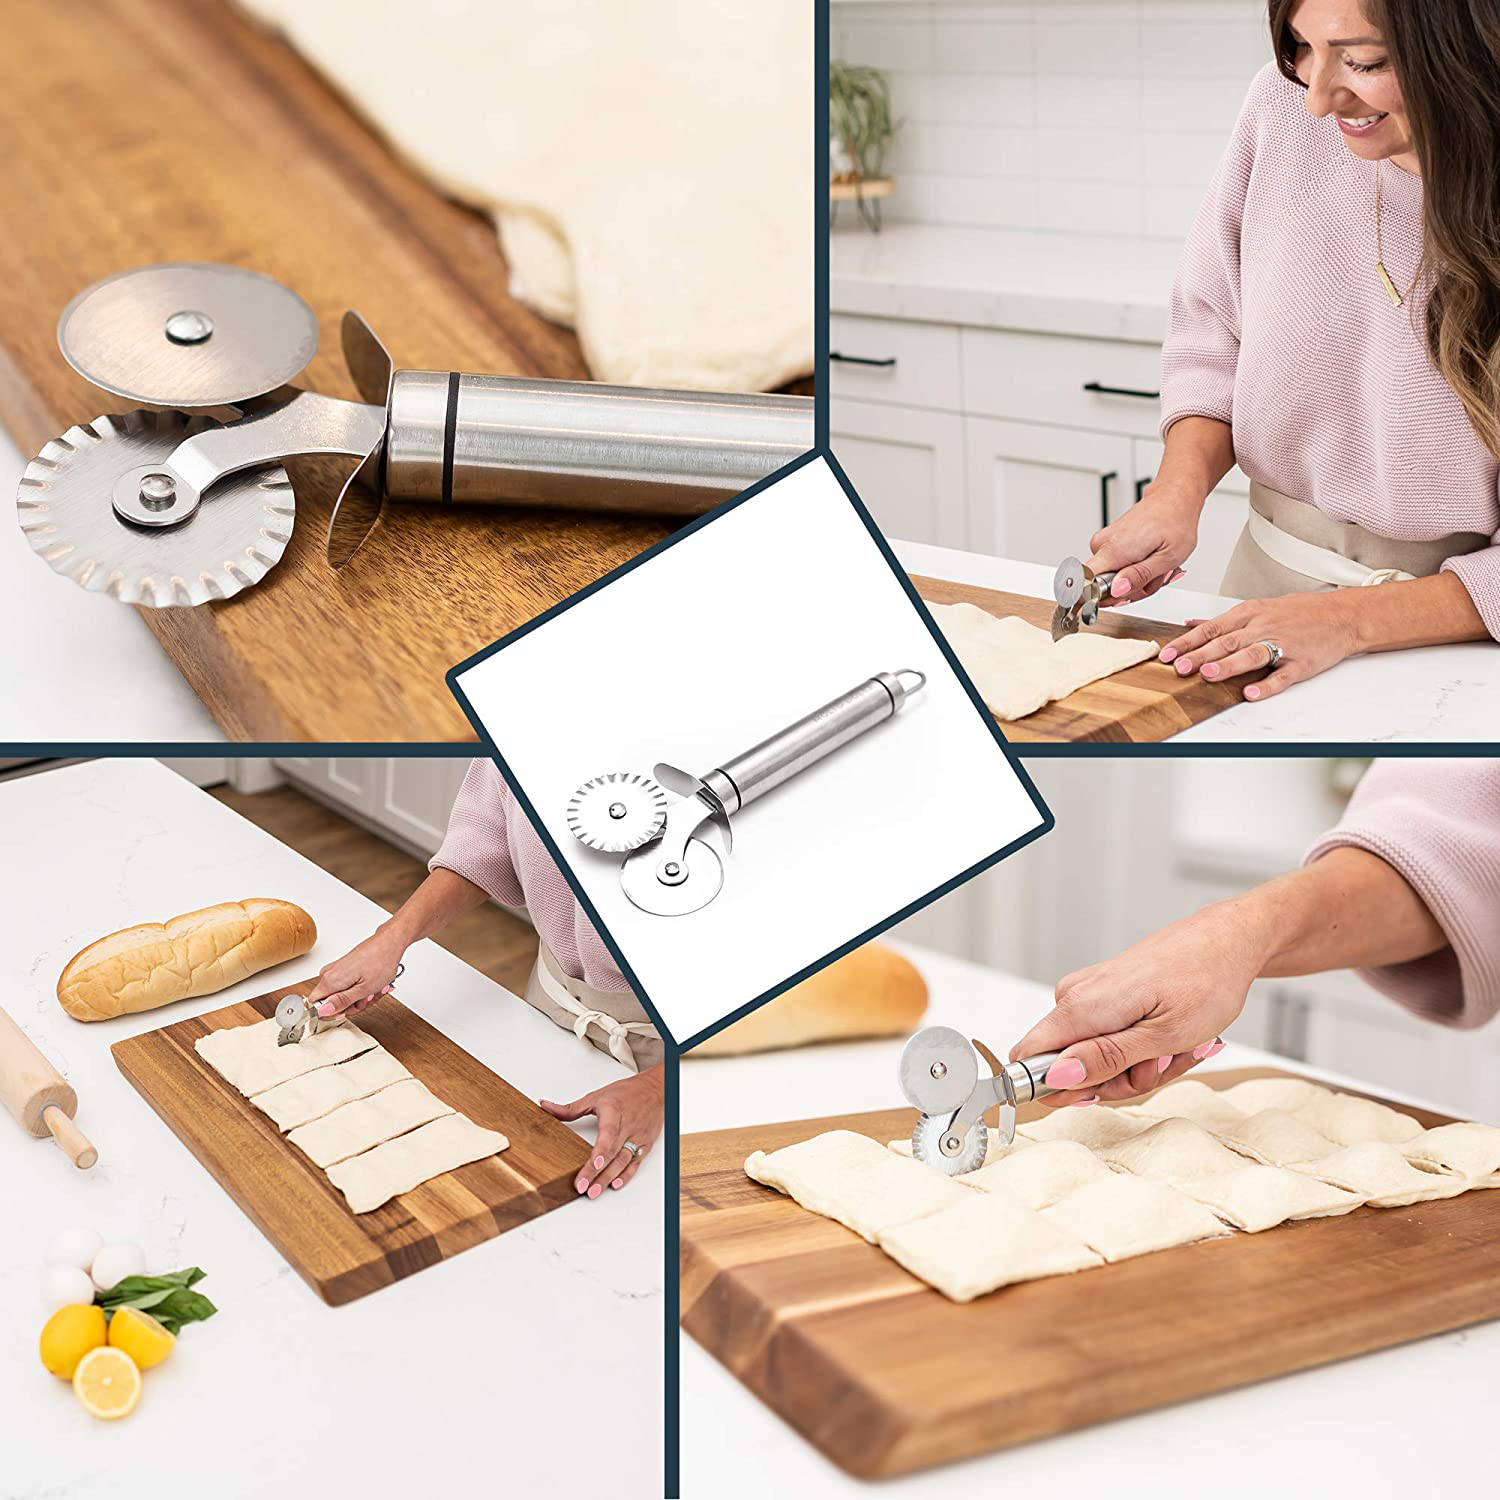 5 Wheel Pastry Cutter Pasta Cutter Set. Pasta Making Tool with Adjustable  Accordian Dough Cutter, Dual Fluted Ravioli Cutter Pizza Slicer, and Bench  Scraper, Noodle, Cookie, Pie Lettuce 